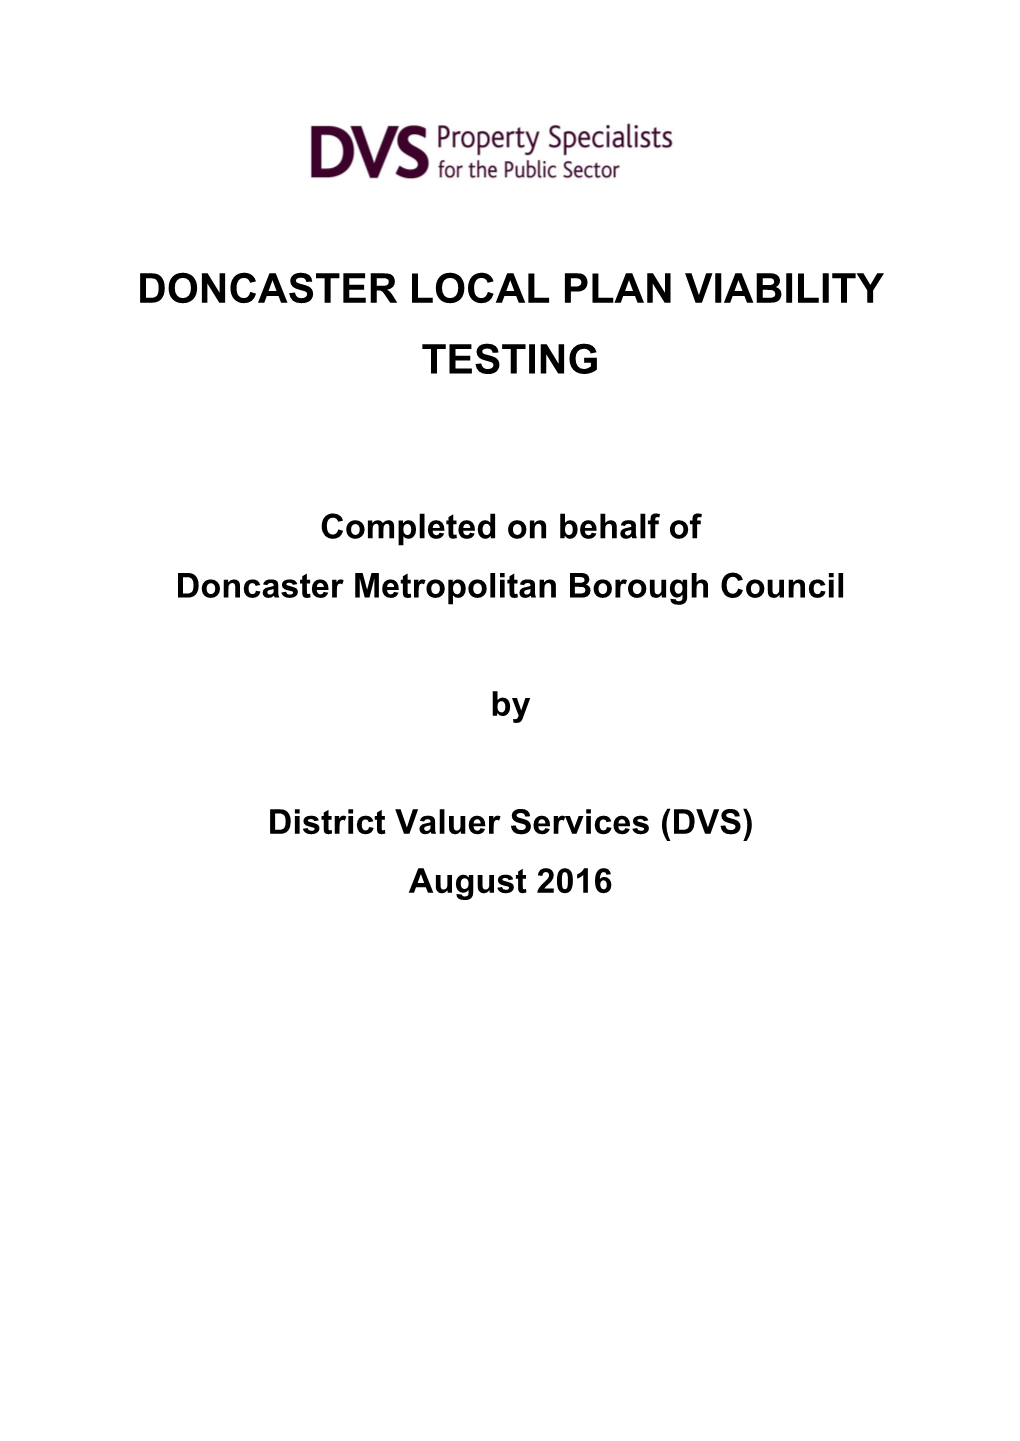 Doncaster Local Plan Viability Testing